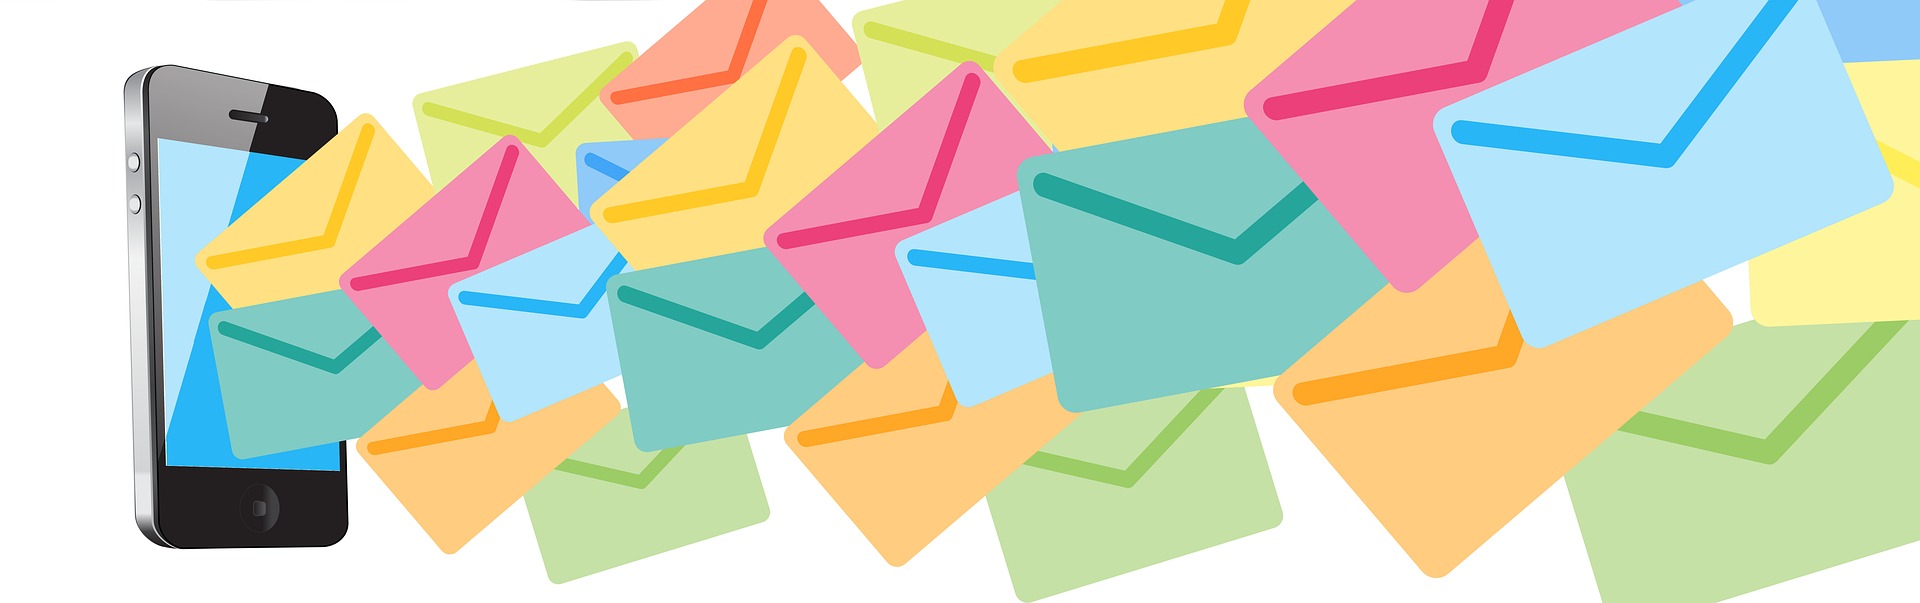 Image of Emails overload representing the importance of an email distribution schedule